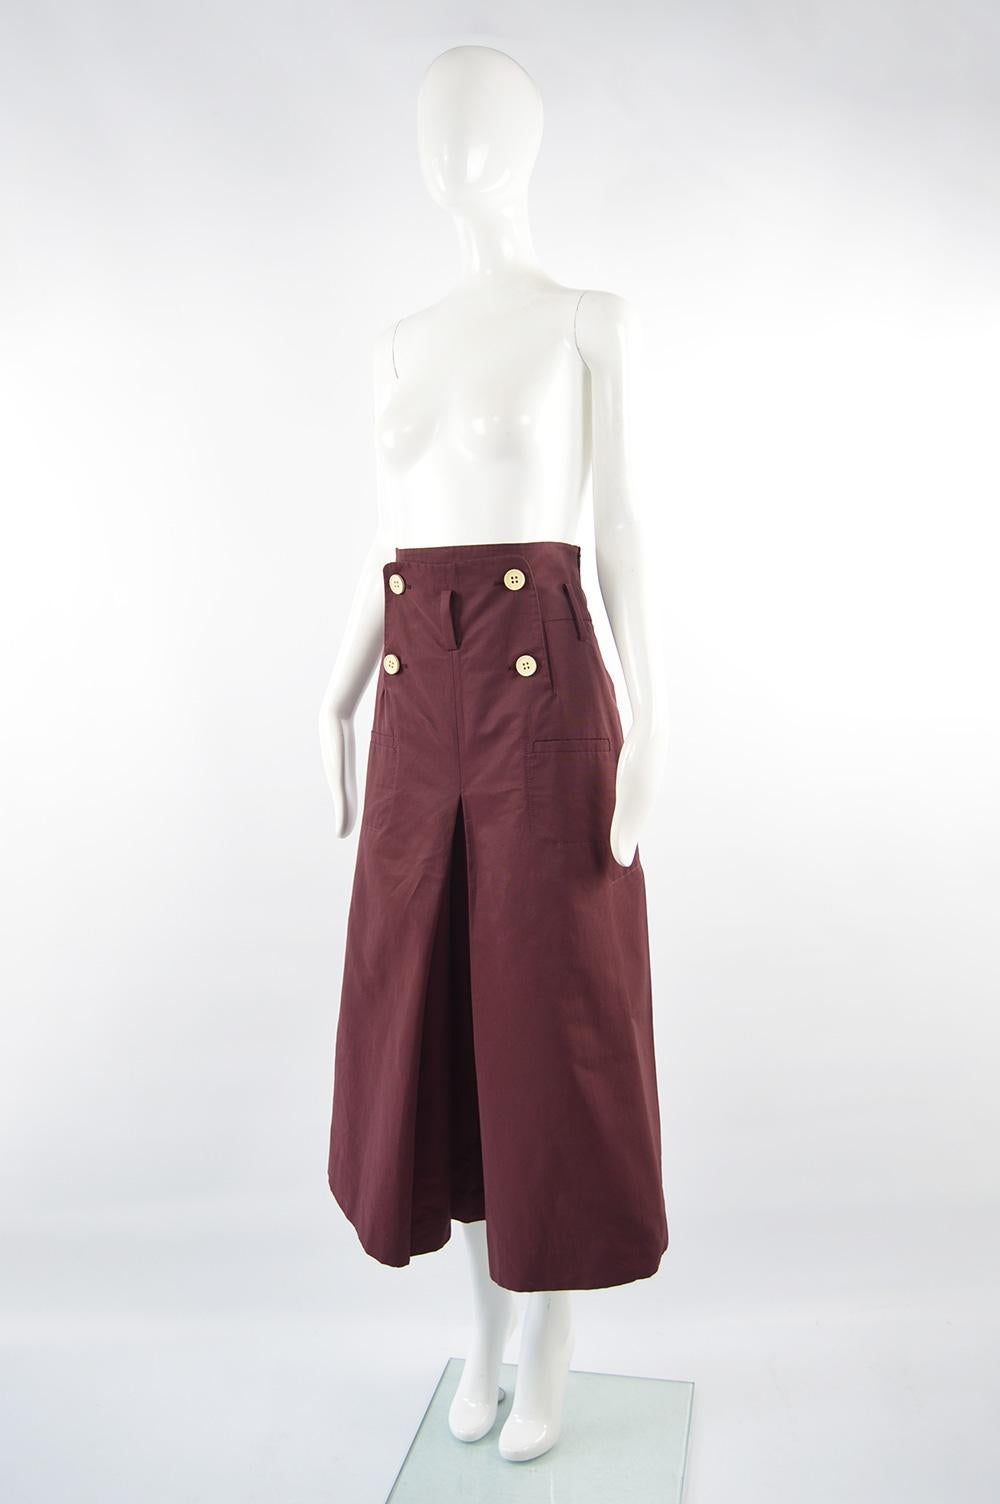 Sonia Rykiel Vintage Ultra Wide Leg High Waisted Culottes Shorts, 1990s In Excellent Condition For Sale In Doncaster, South Yorkshire